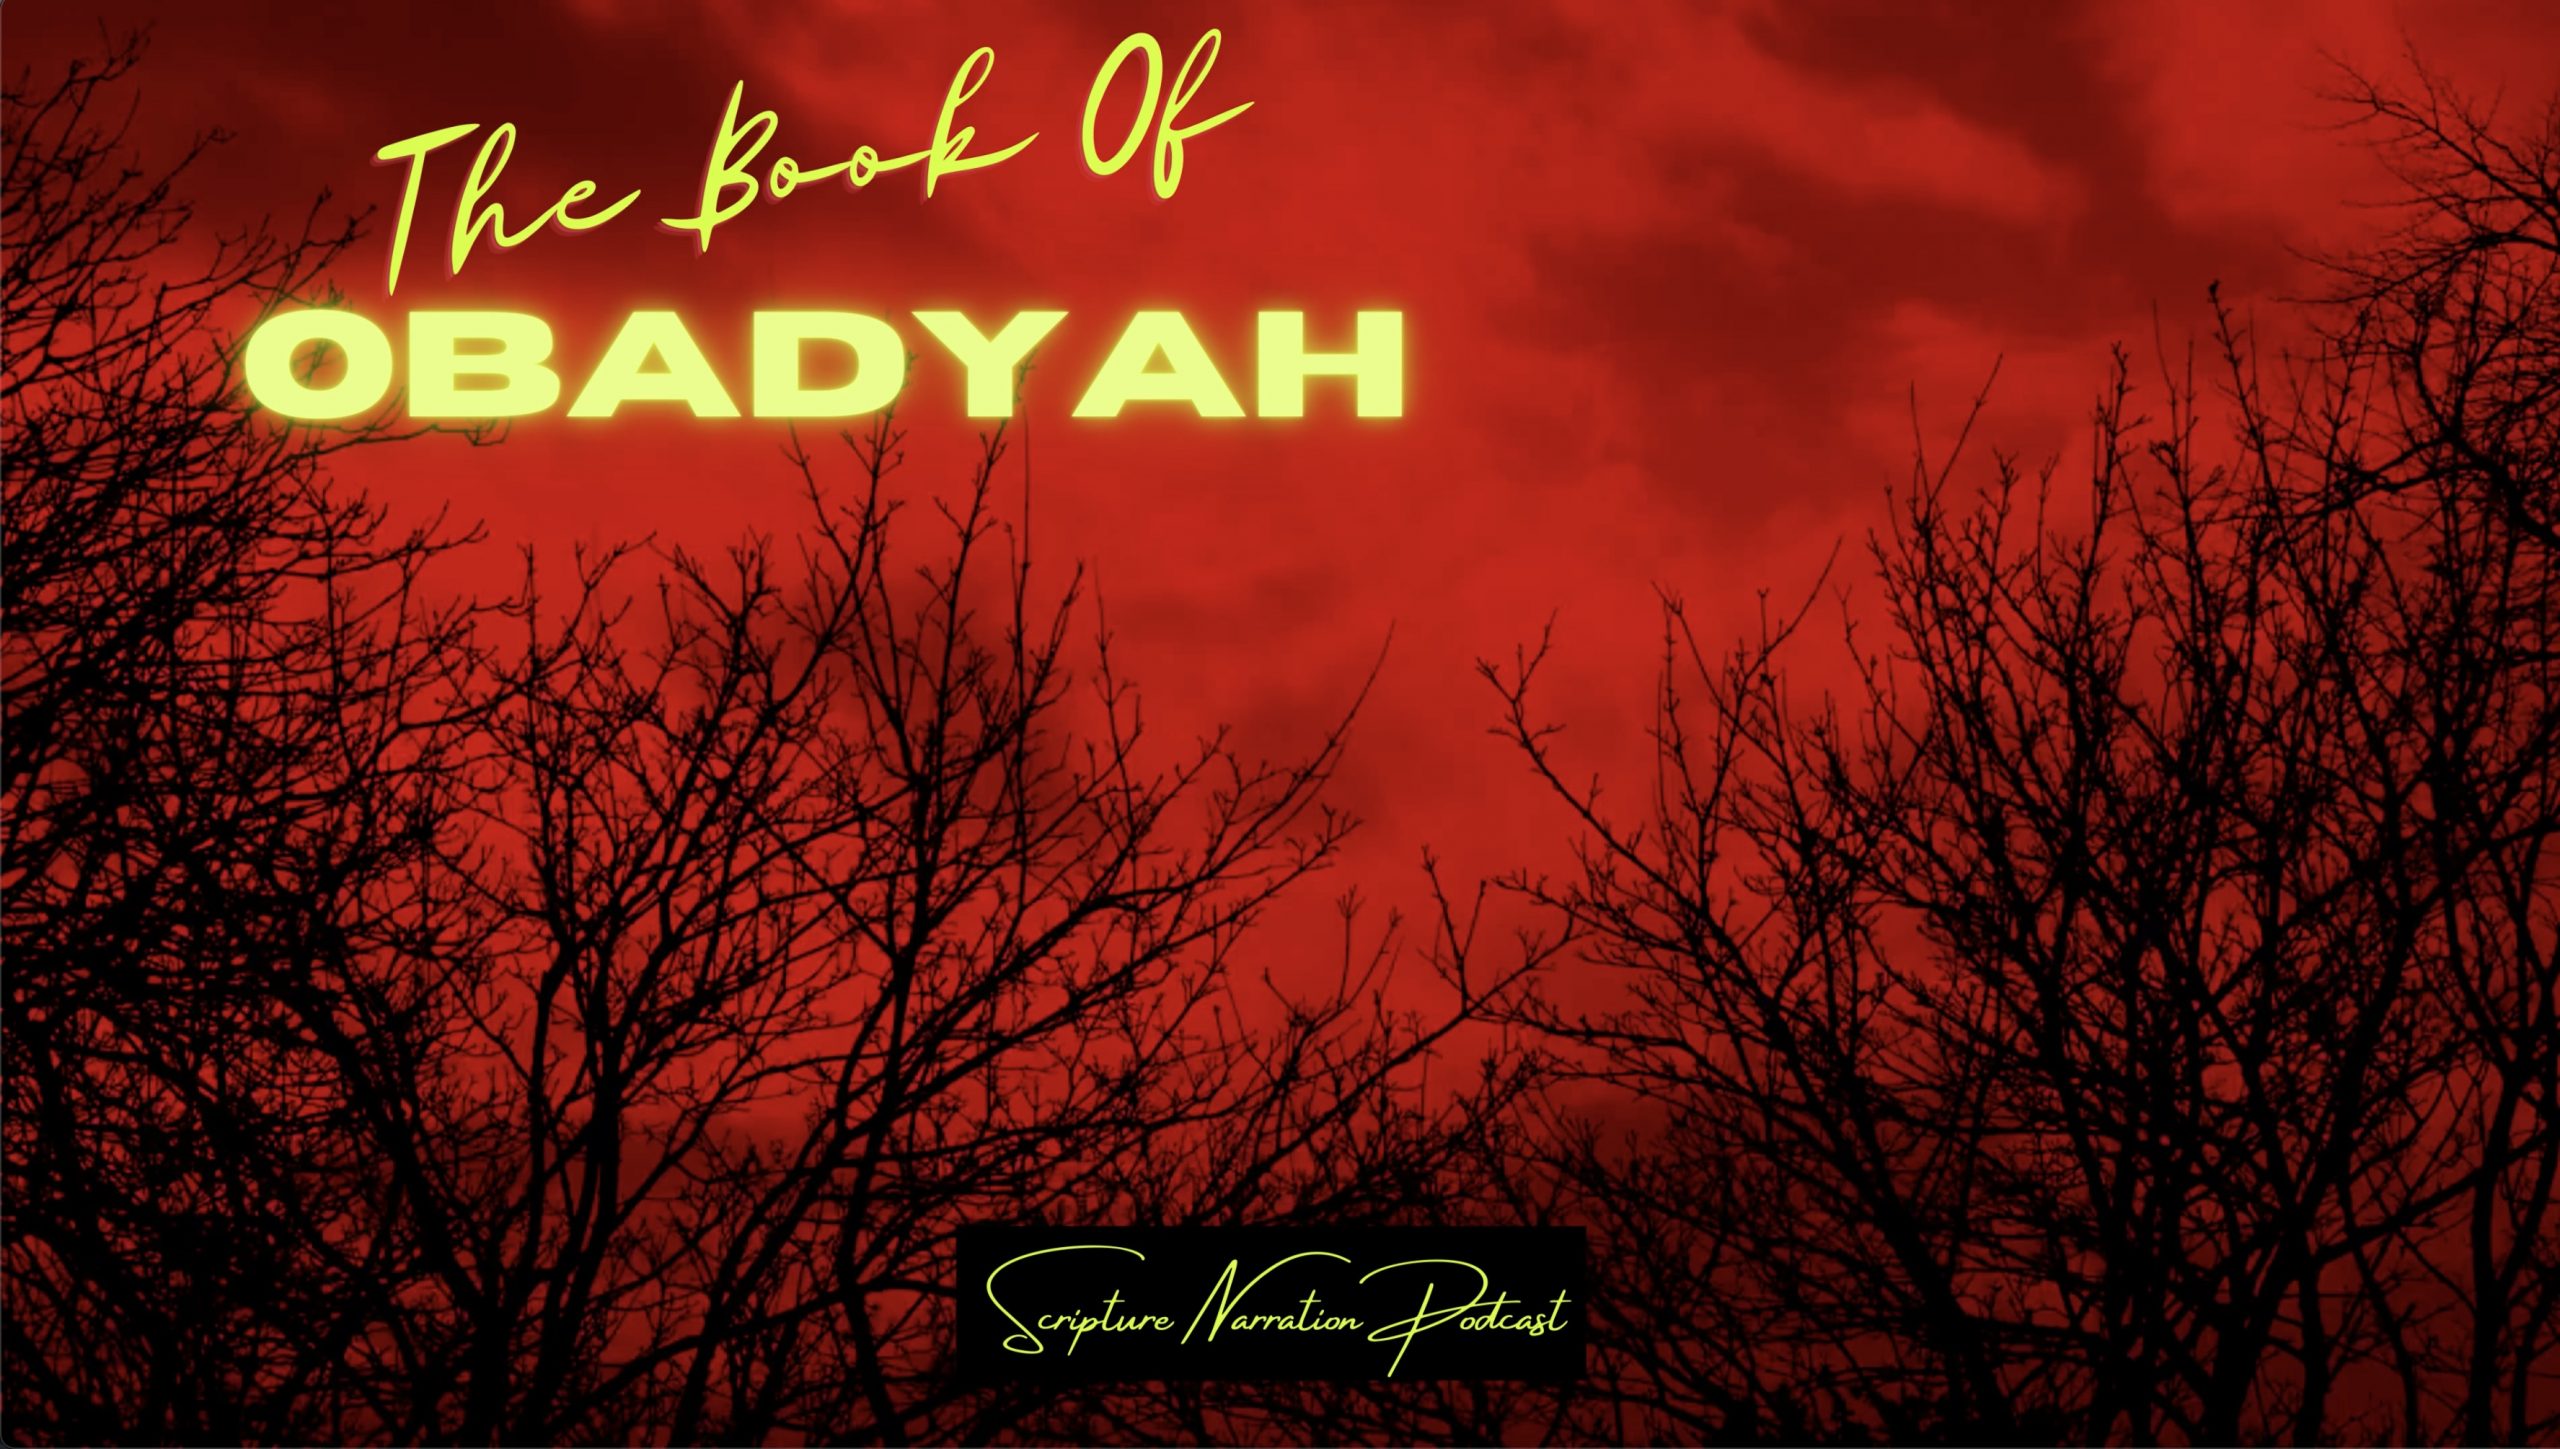 All Praises to 𐤉𐤄𐤅𐤄 our Elohiym! Season 3 - Judgement Comes The Book Of OBADYAH Excerpts from the scriptures. Scripture Narration Podcast